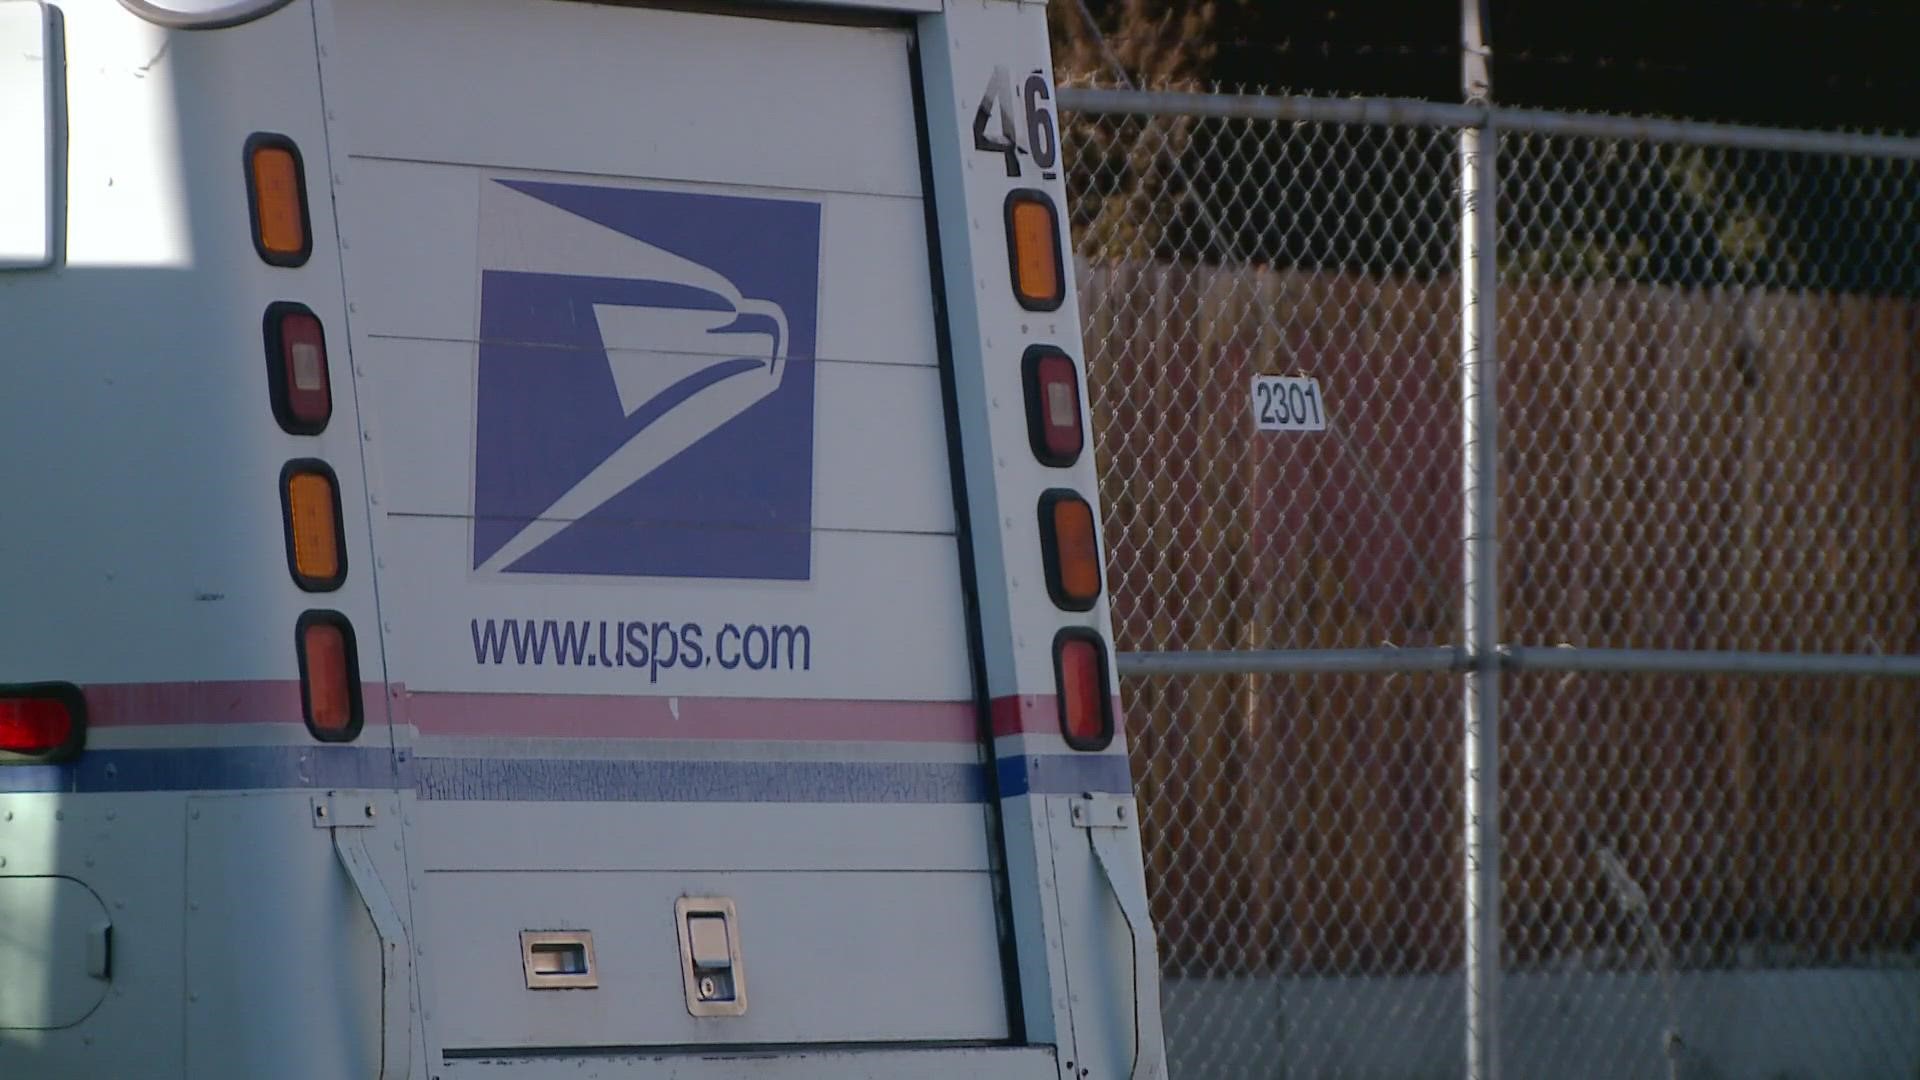 Summit County is now the latest place where people haven't received mail for weeks.